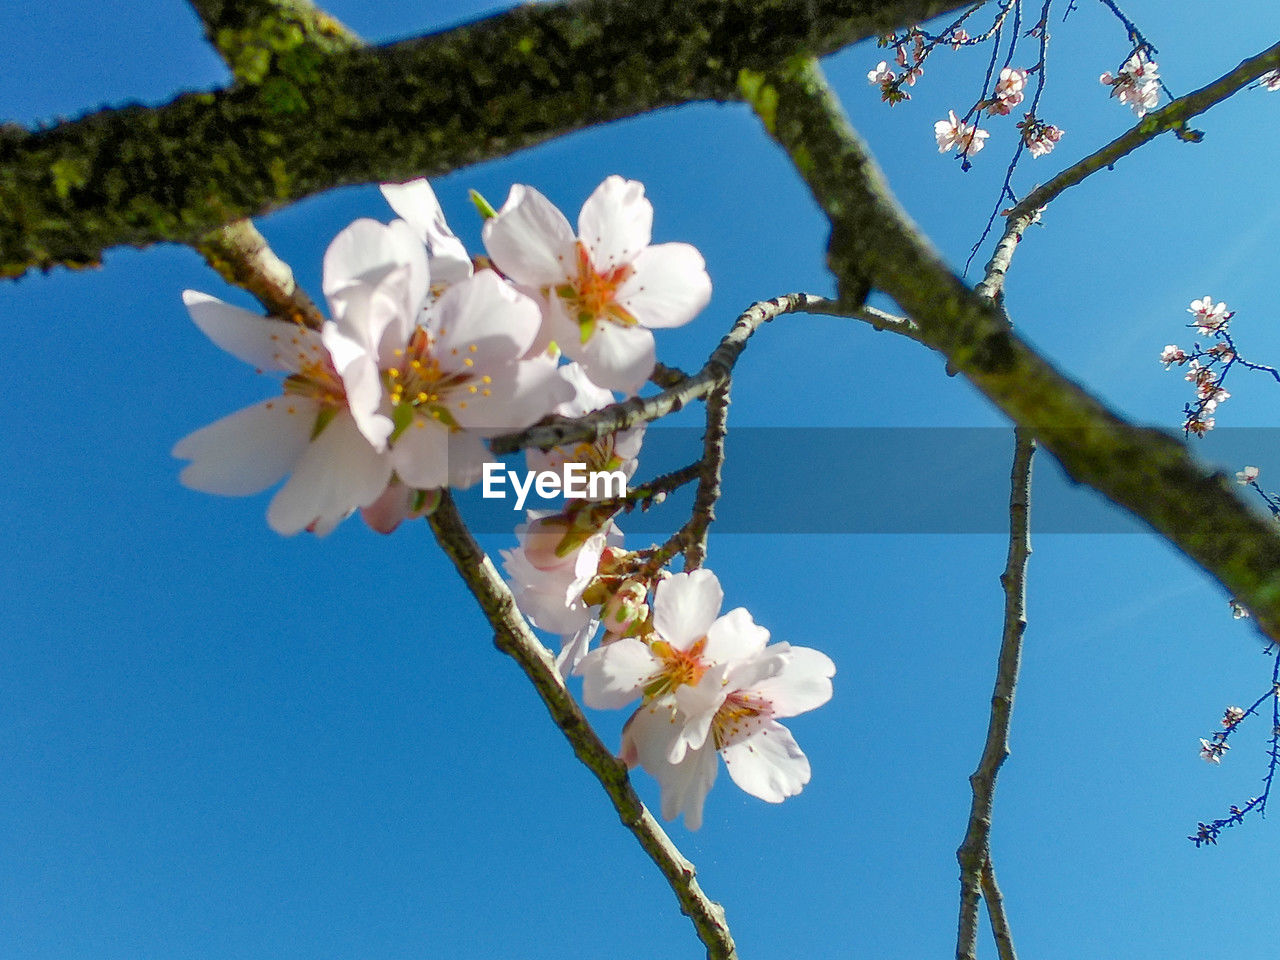 plant, flower, flowering plant, tree, fragility, blossom, beauty in nature, freshness, springtime, branch, nature, growth, sky, blue, clear sky, white, low angle view, no people, close-up, day, inflorescence, fruit tree, twig, flower head, petal, outdoors, cherry blossom, produce, spring, pink, botany, sunny, sunlight, apple tree, focus on foreground, food and drink, pollen, food, fruit, almond tree, apple blossom